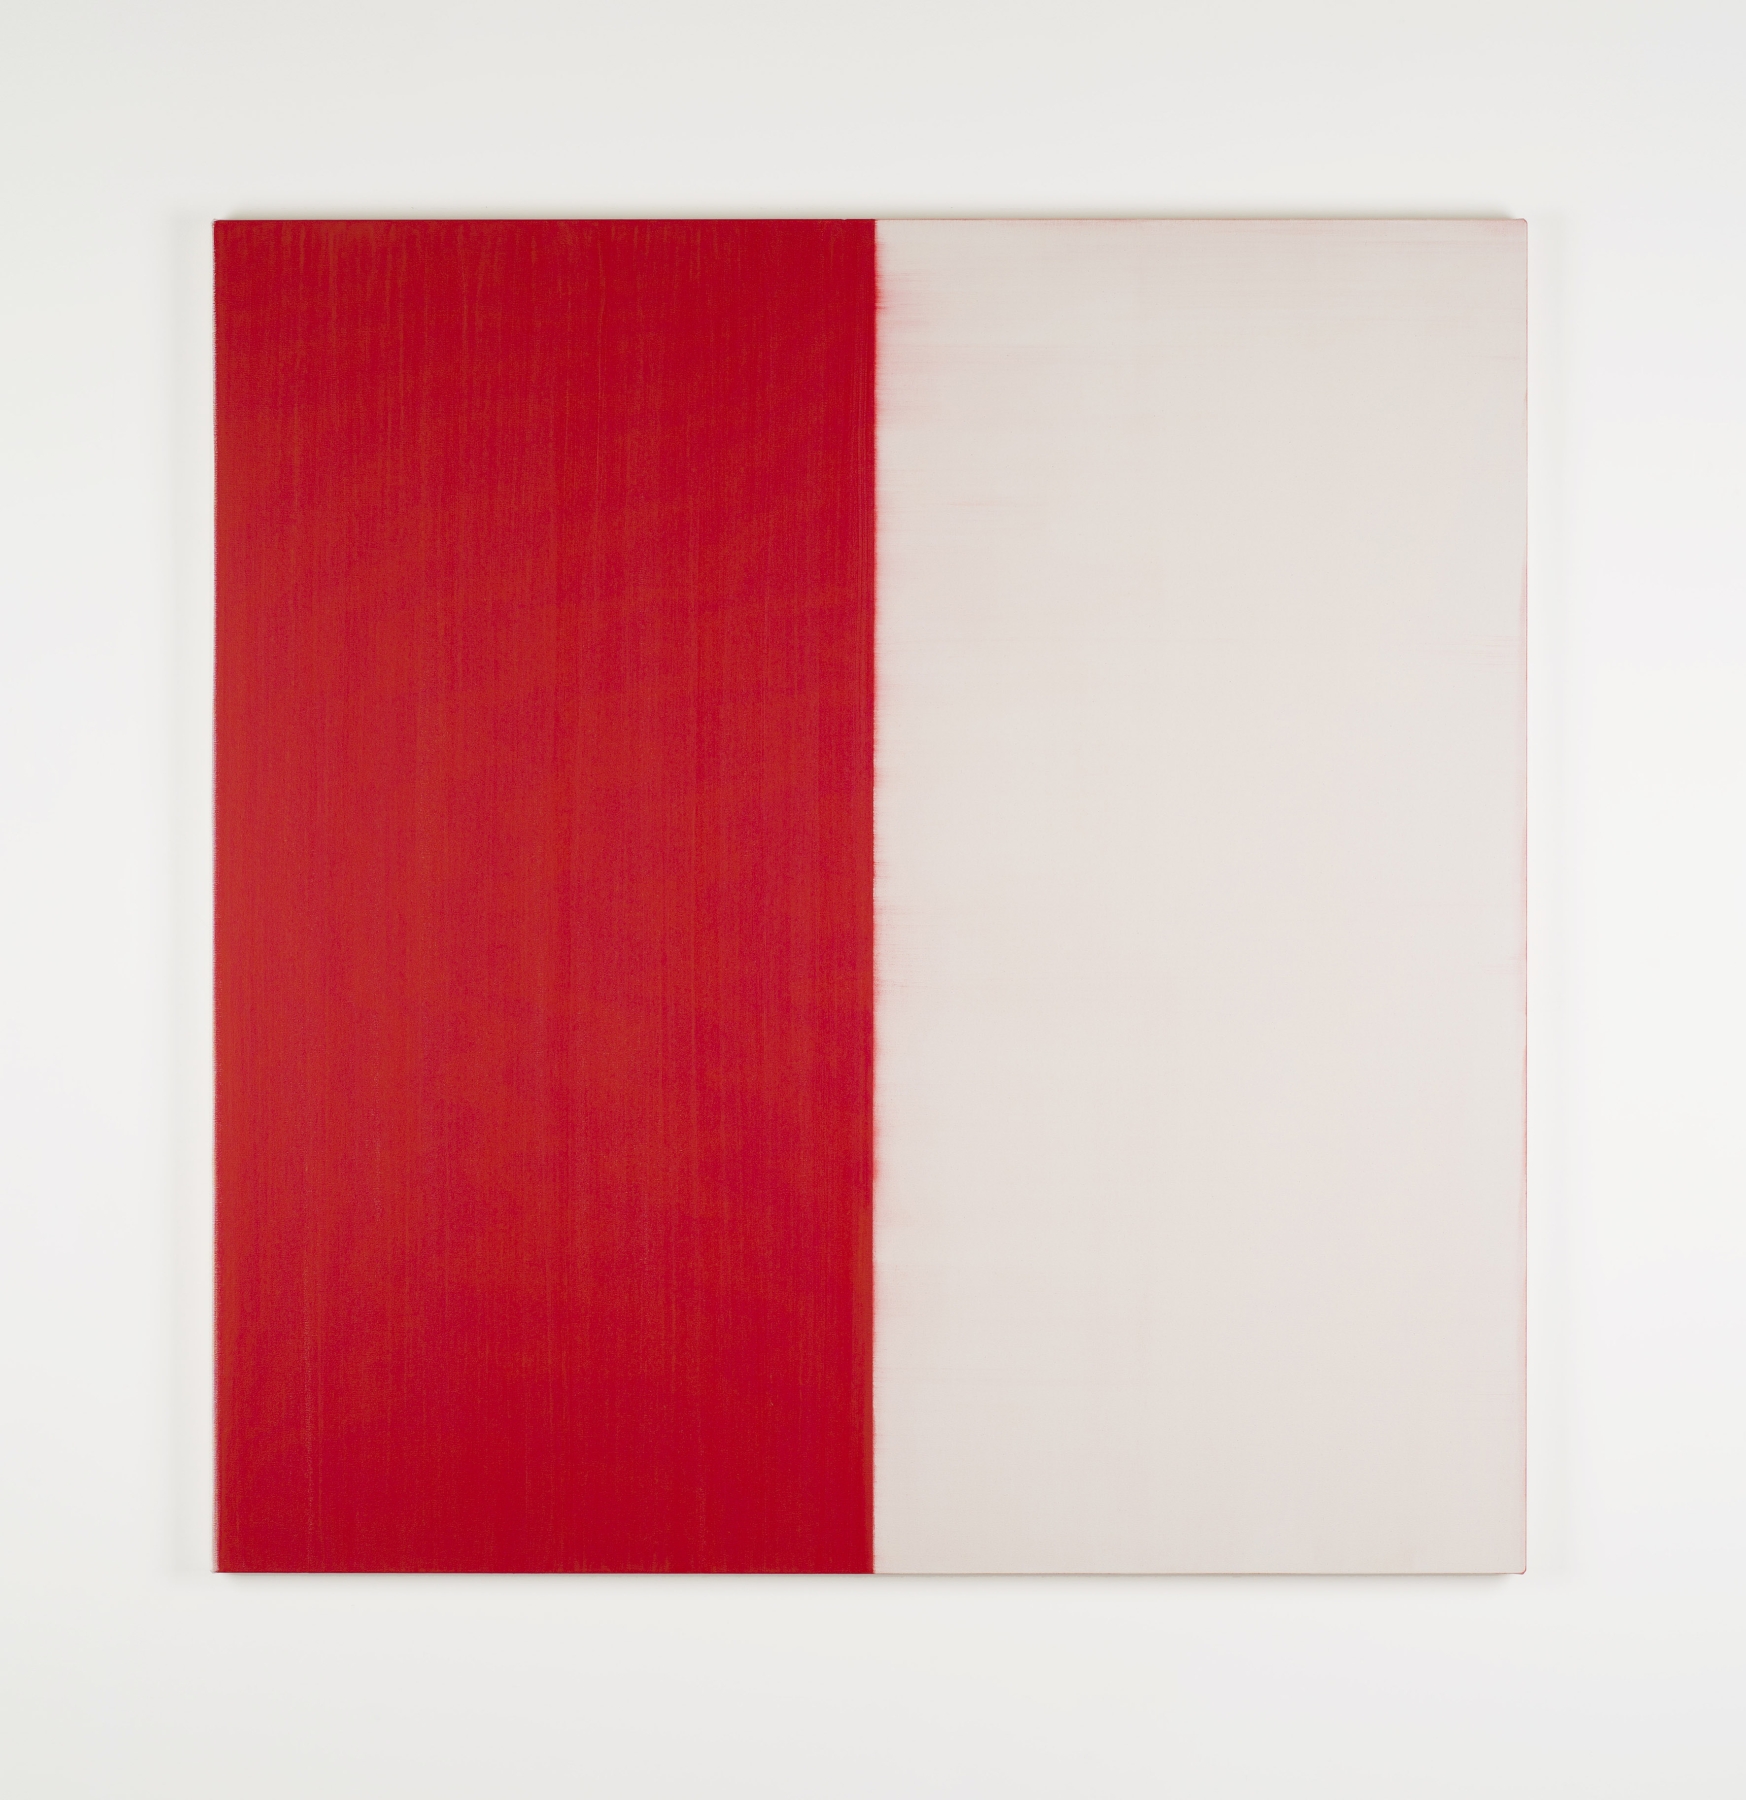 Callum Innes
Untitled Pyrrole Red, 2022
oil on canvas
180 x 175 cm / 70.9 x 68.9 in &amp;nbsp;